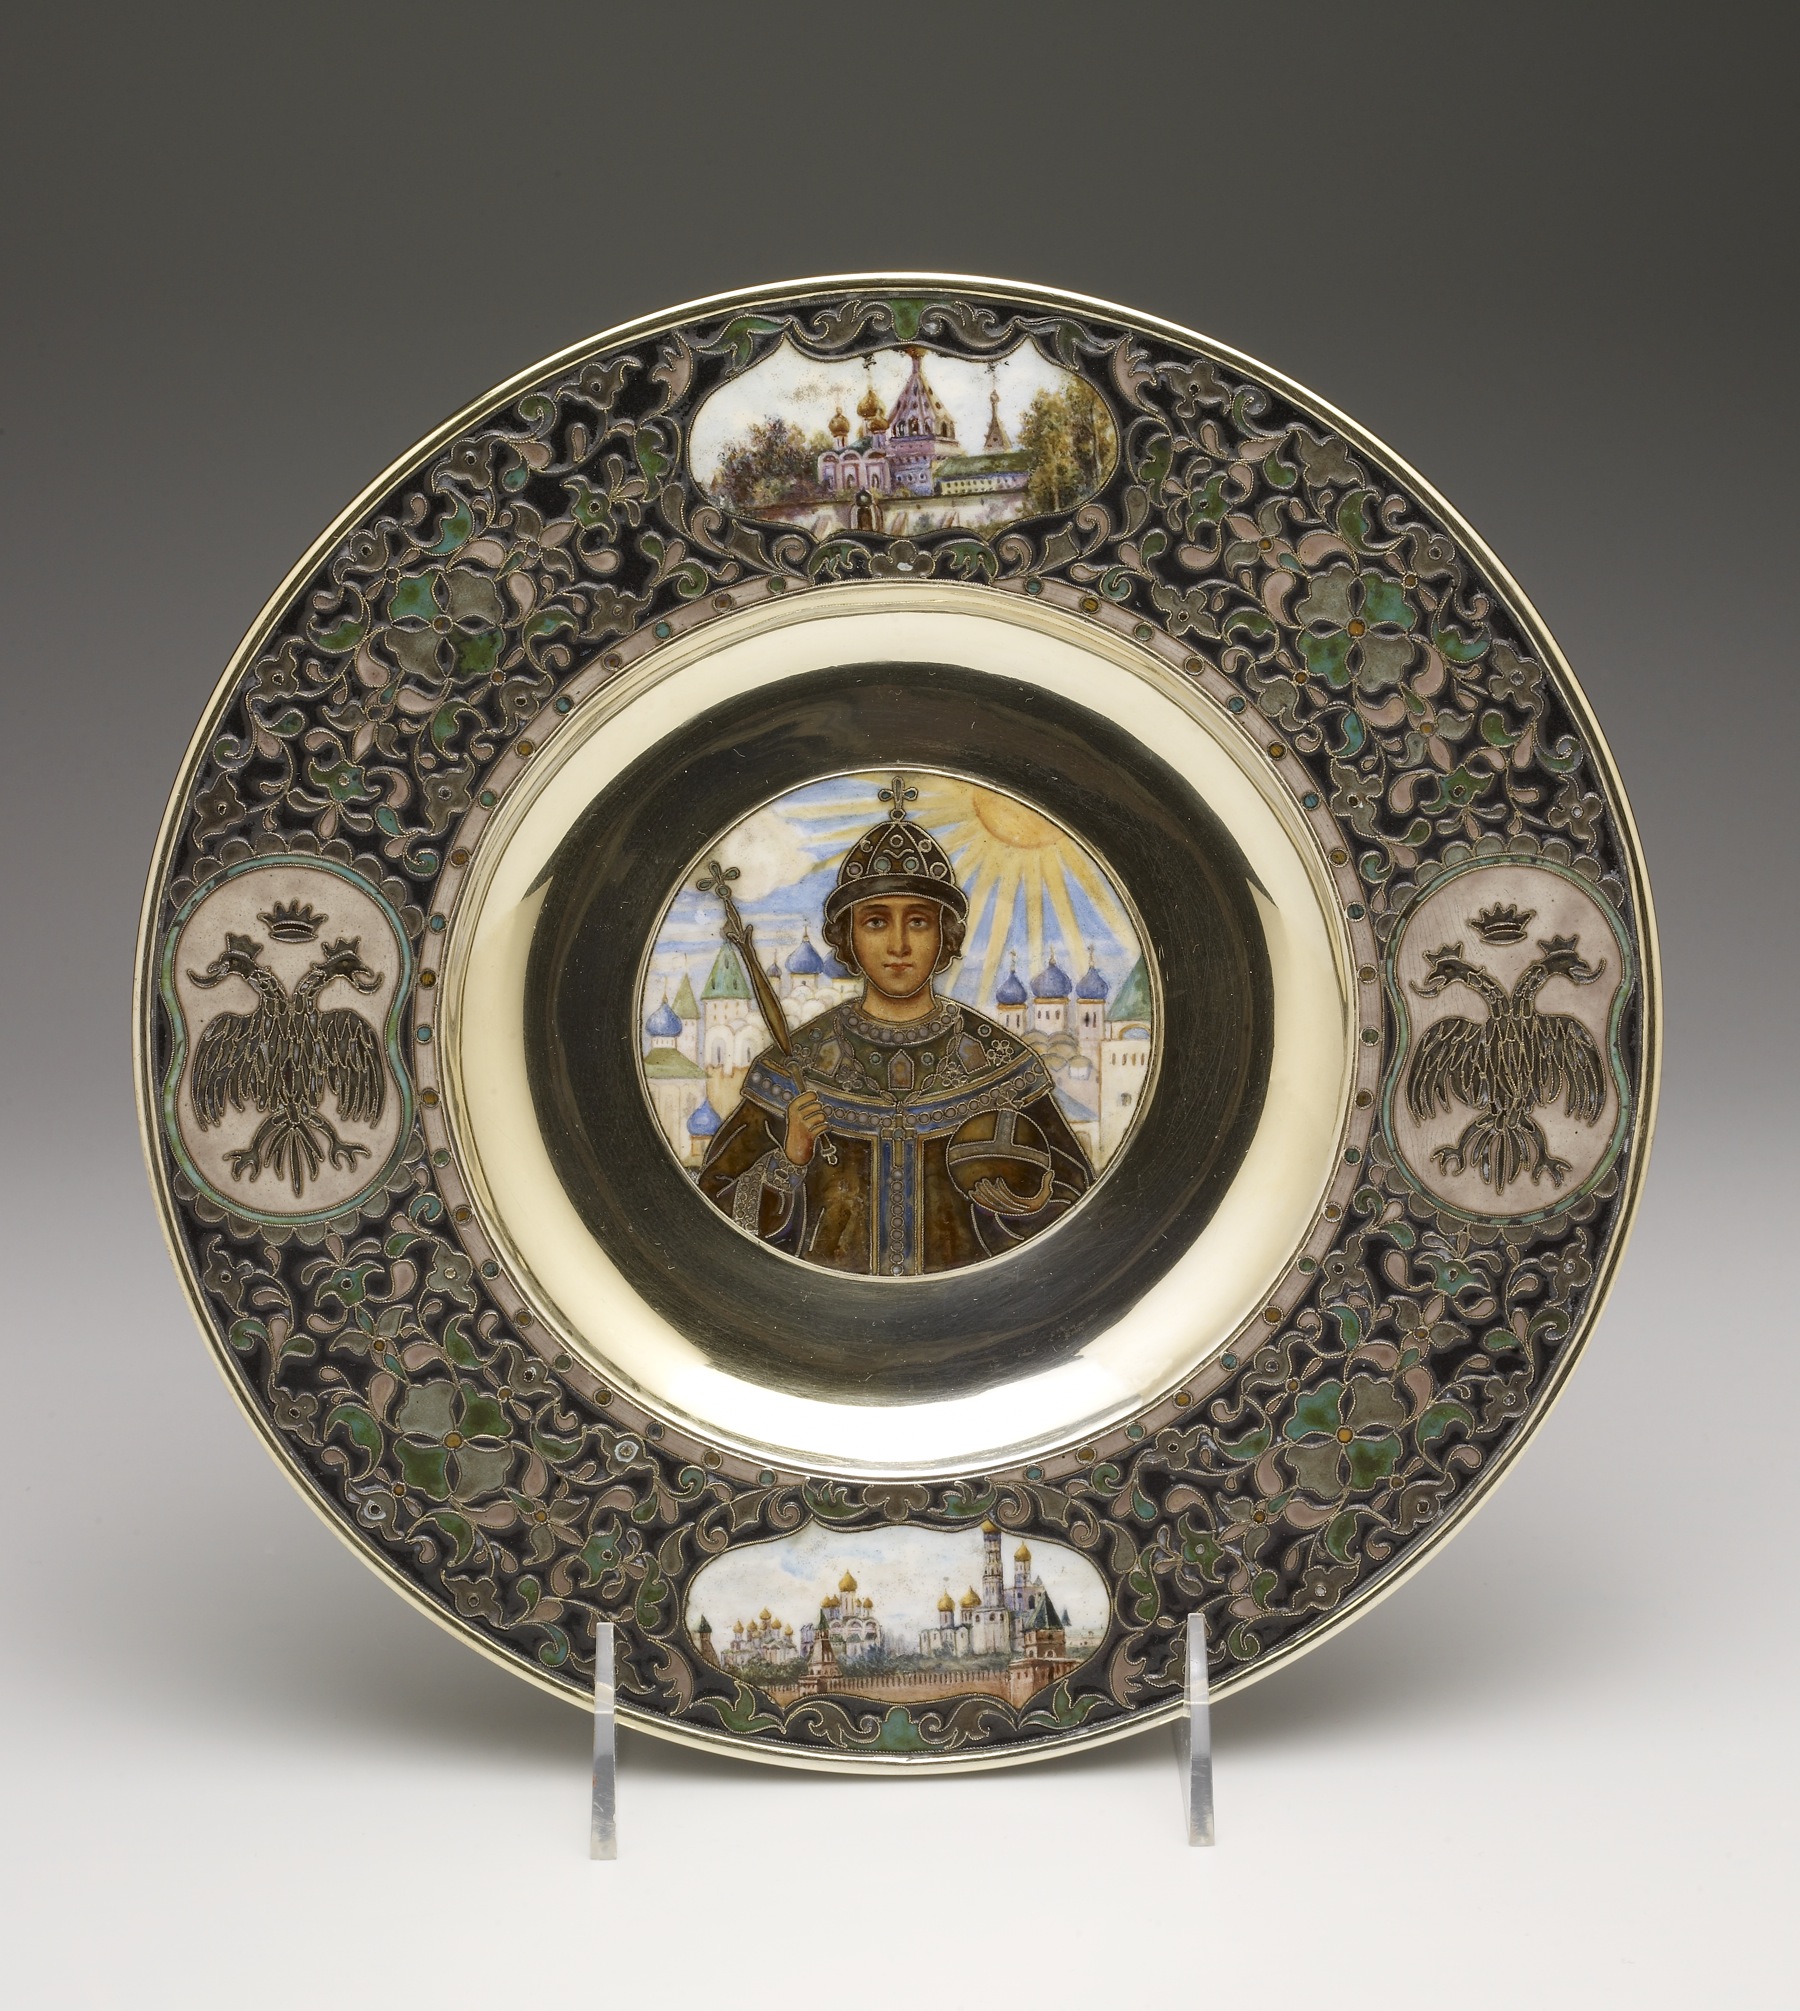 Image for Presentation Plate with Portrait of Tsar Michael